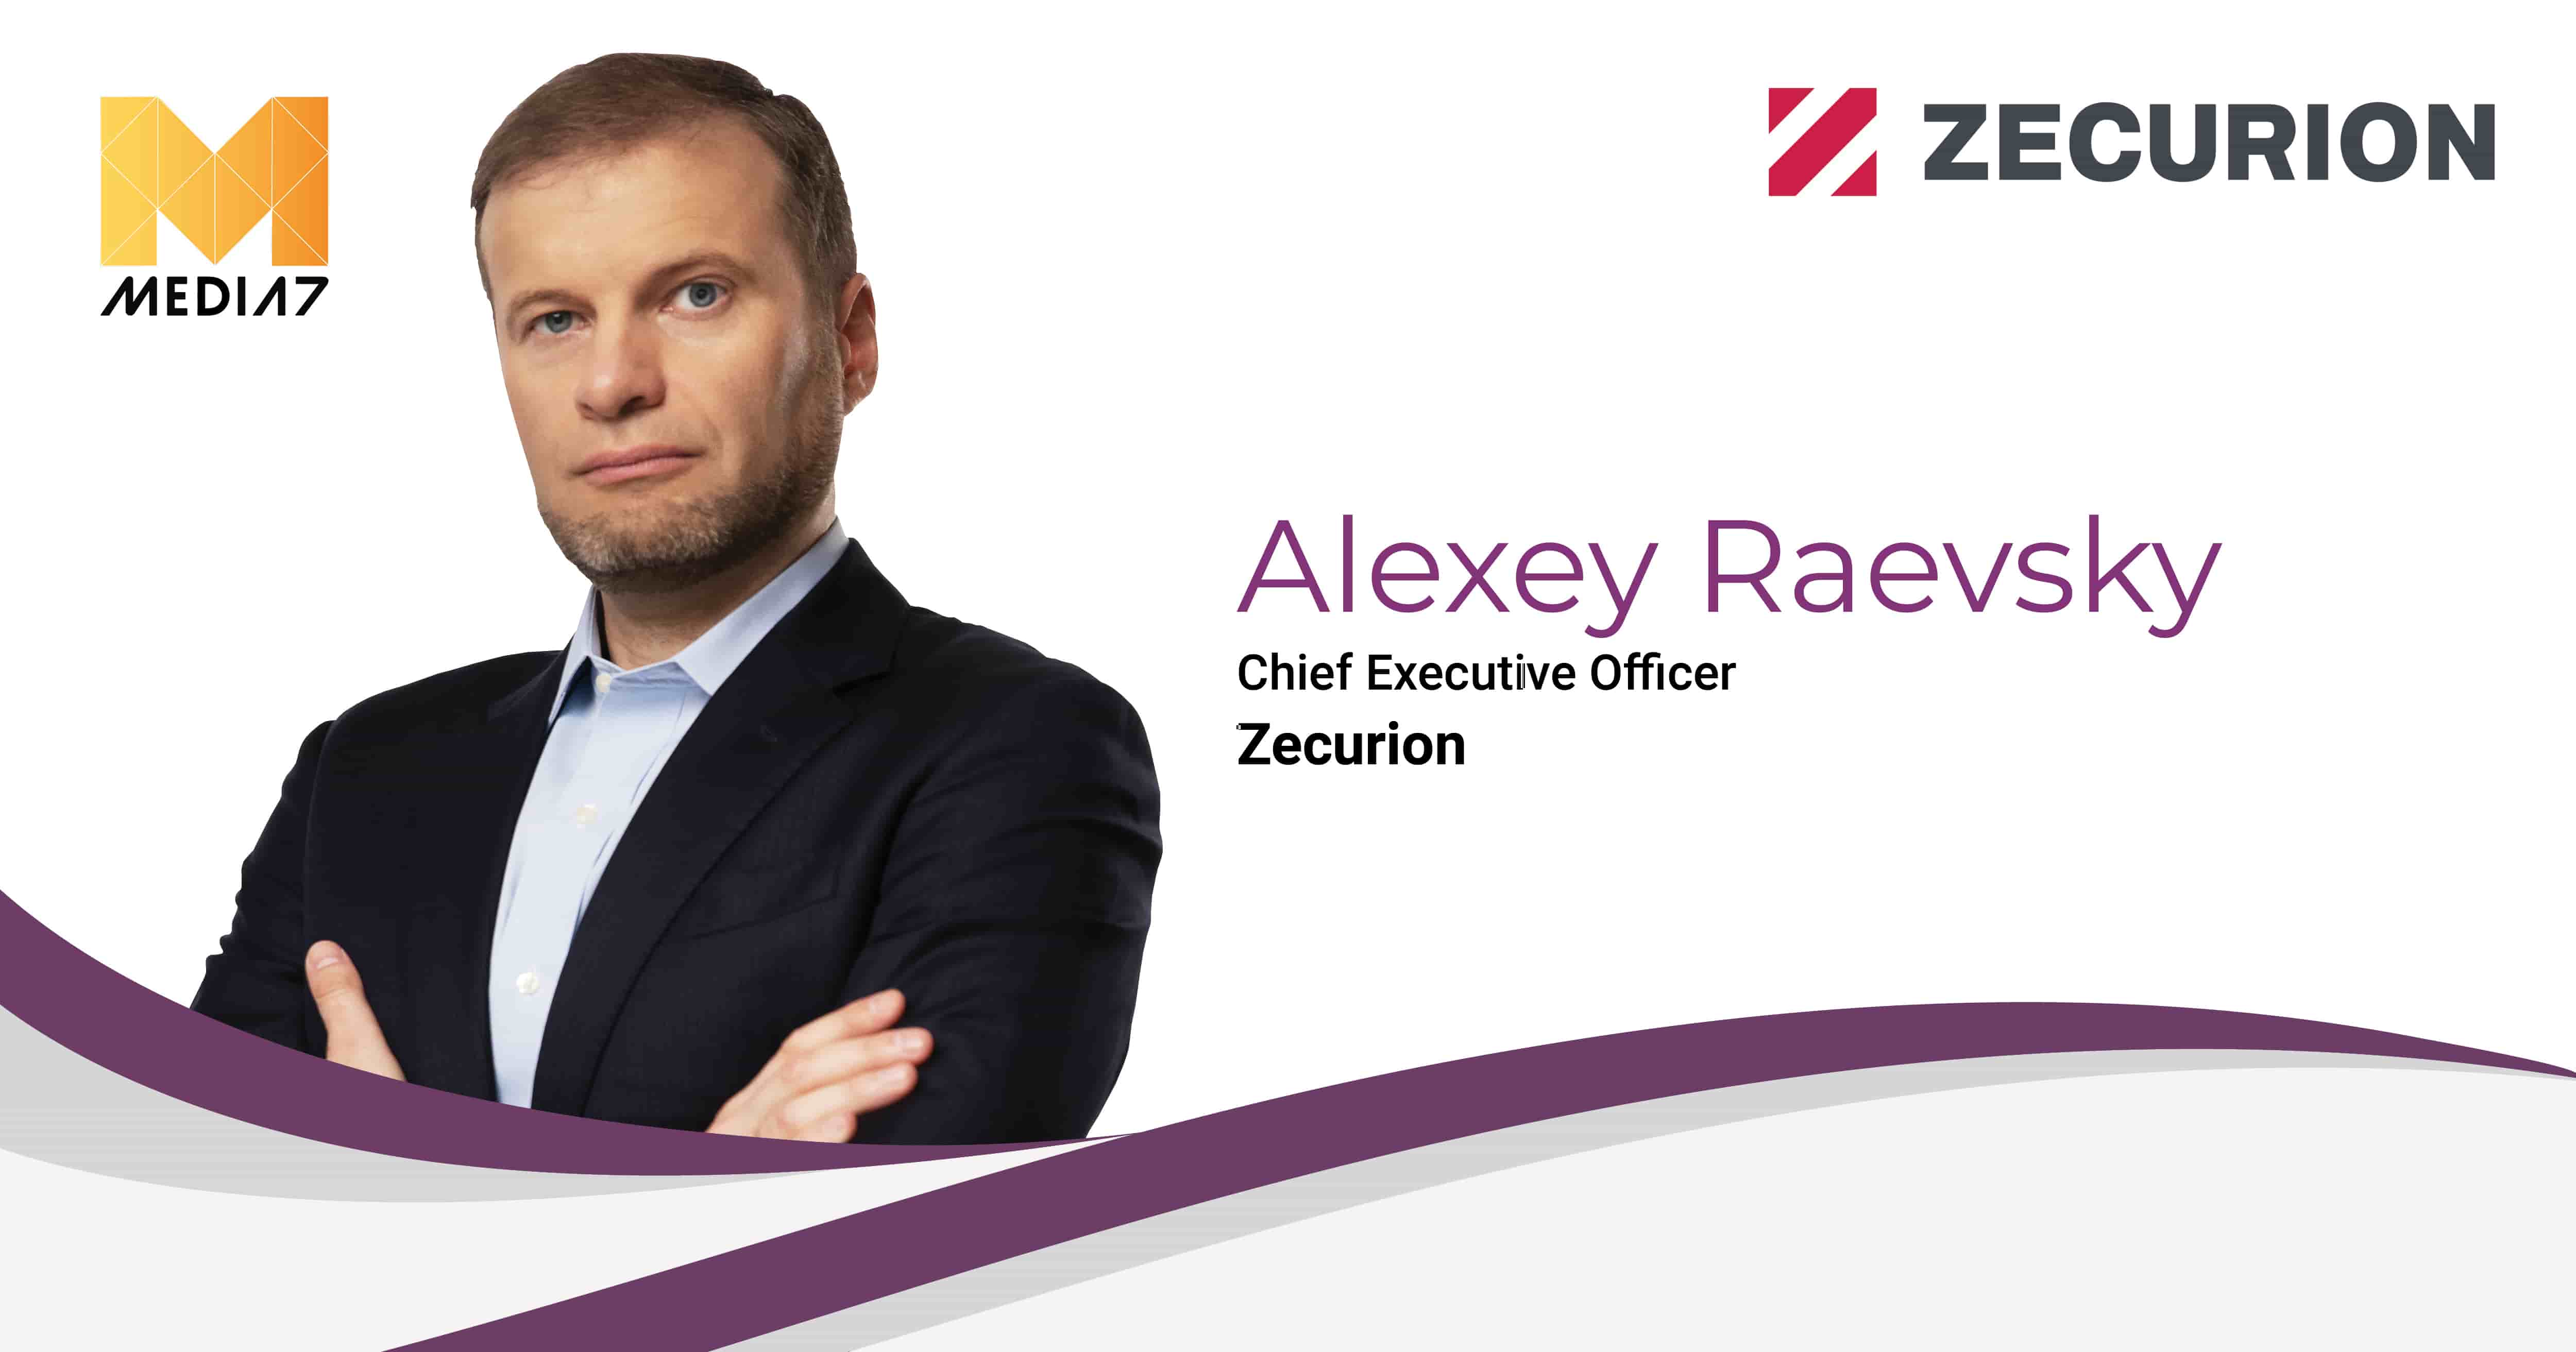 Alexey Raevsky Sheds Light on Cyberattack and Data Protection